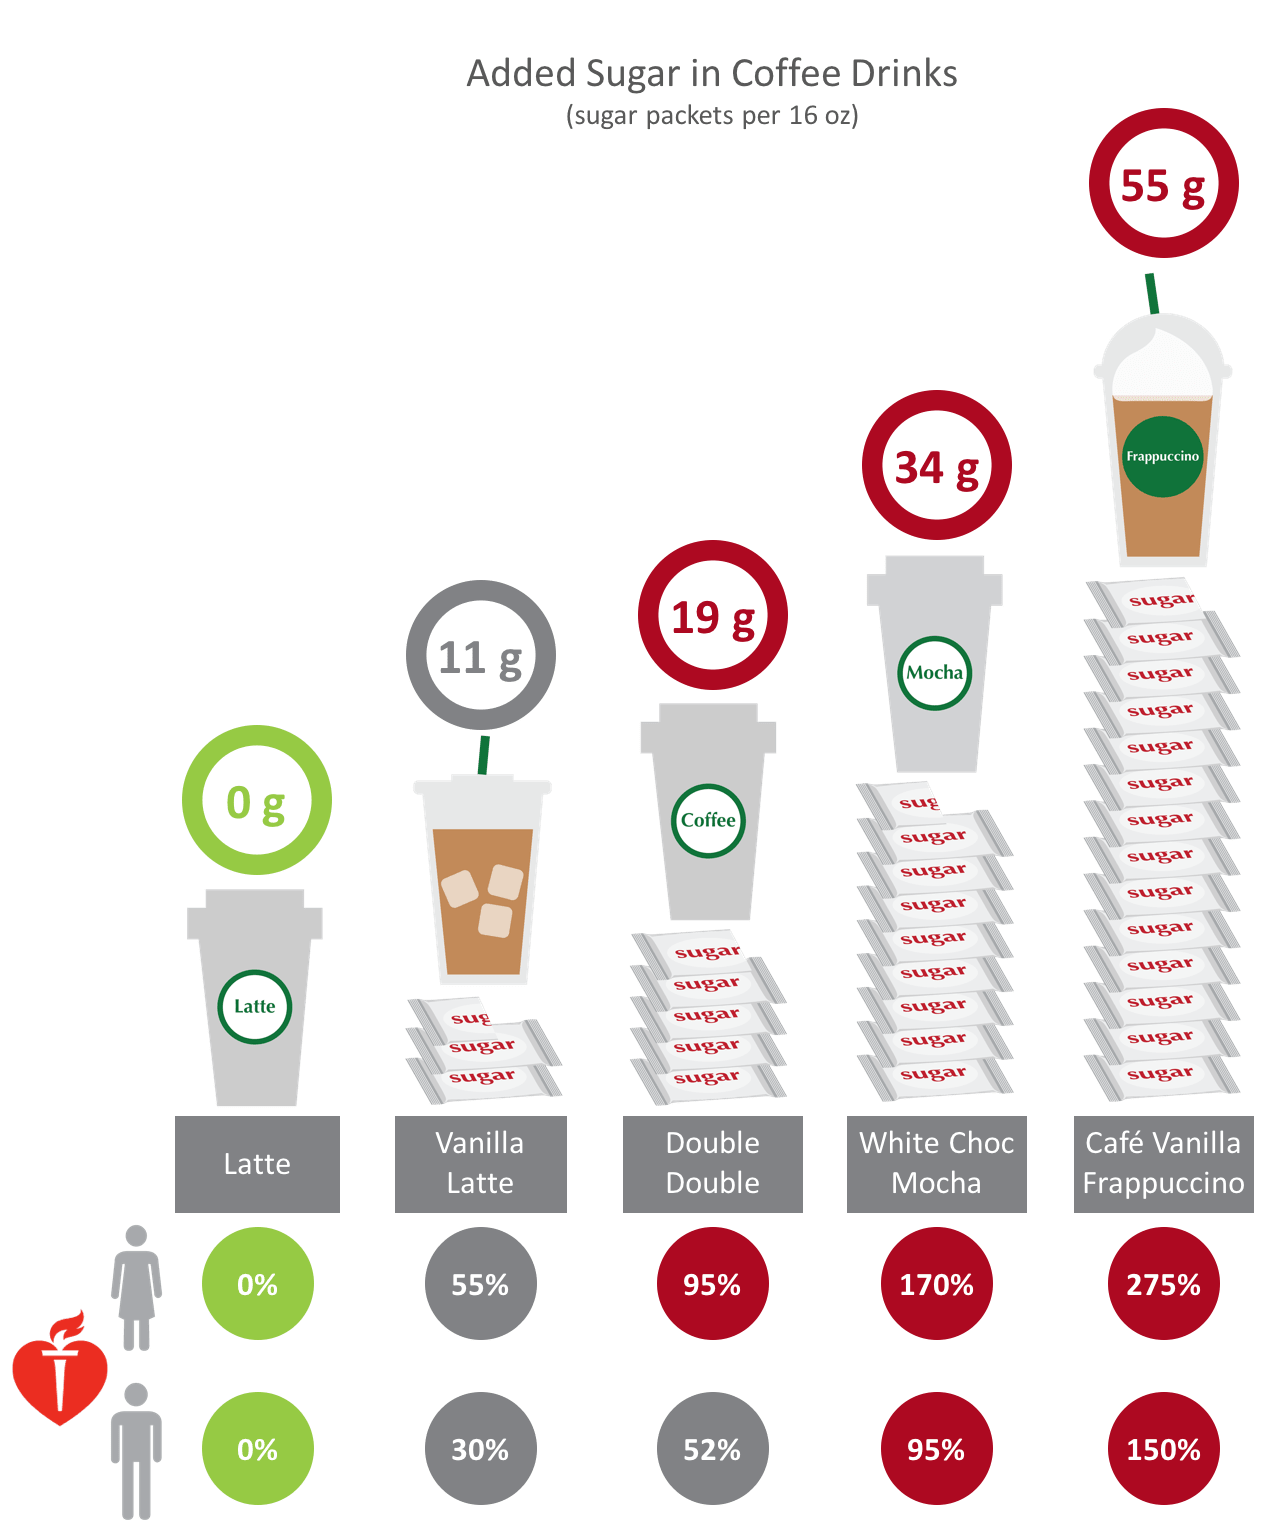 Number of sugar packets of added sugar for various coffee drinks, www.feedthemwisely.com